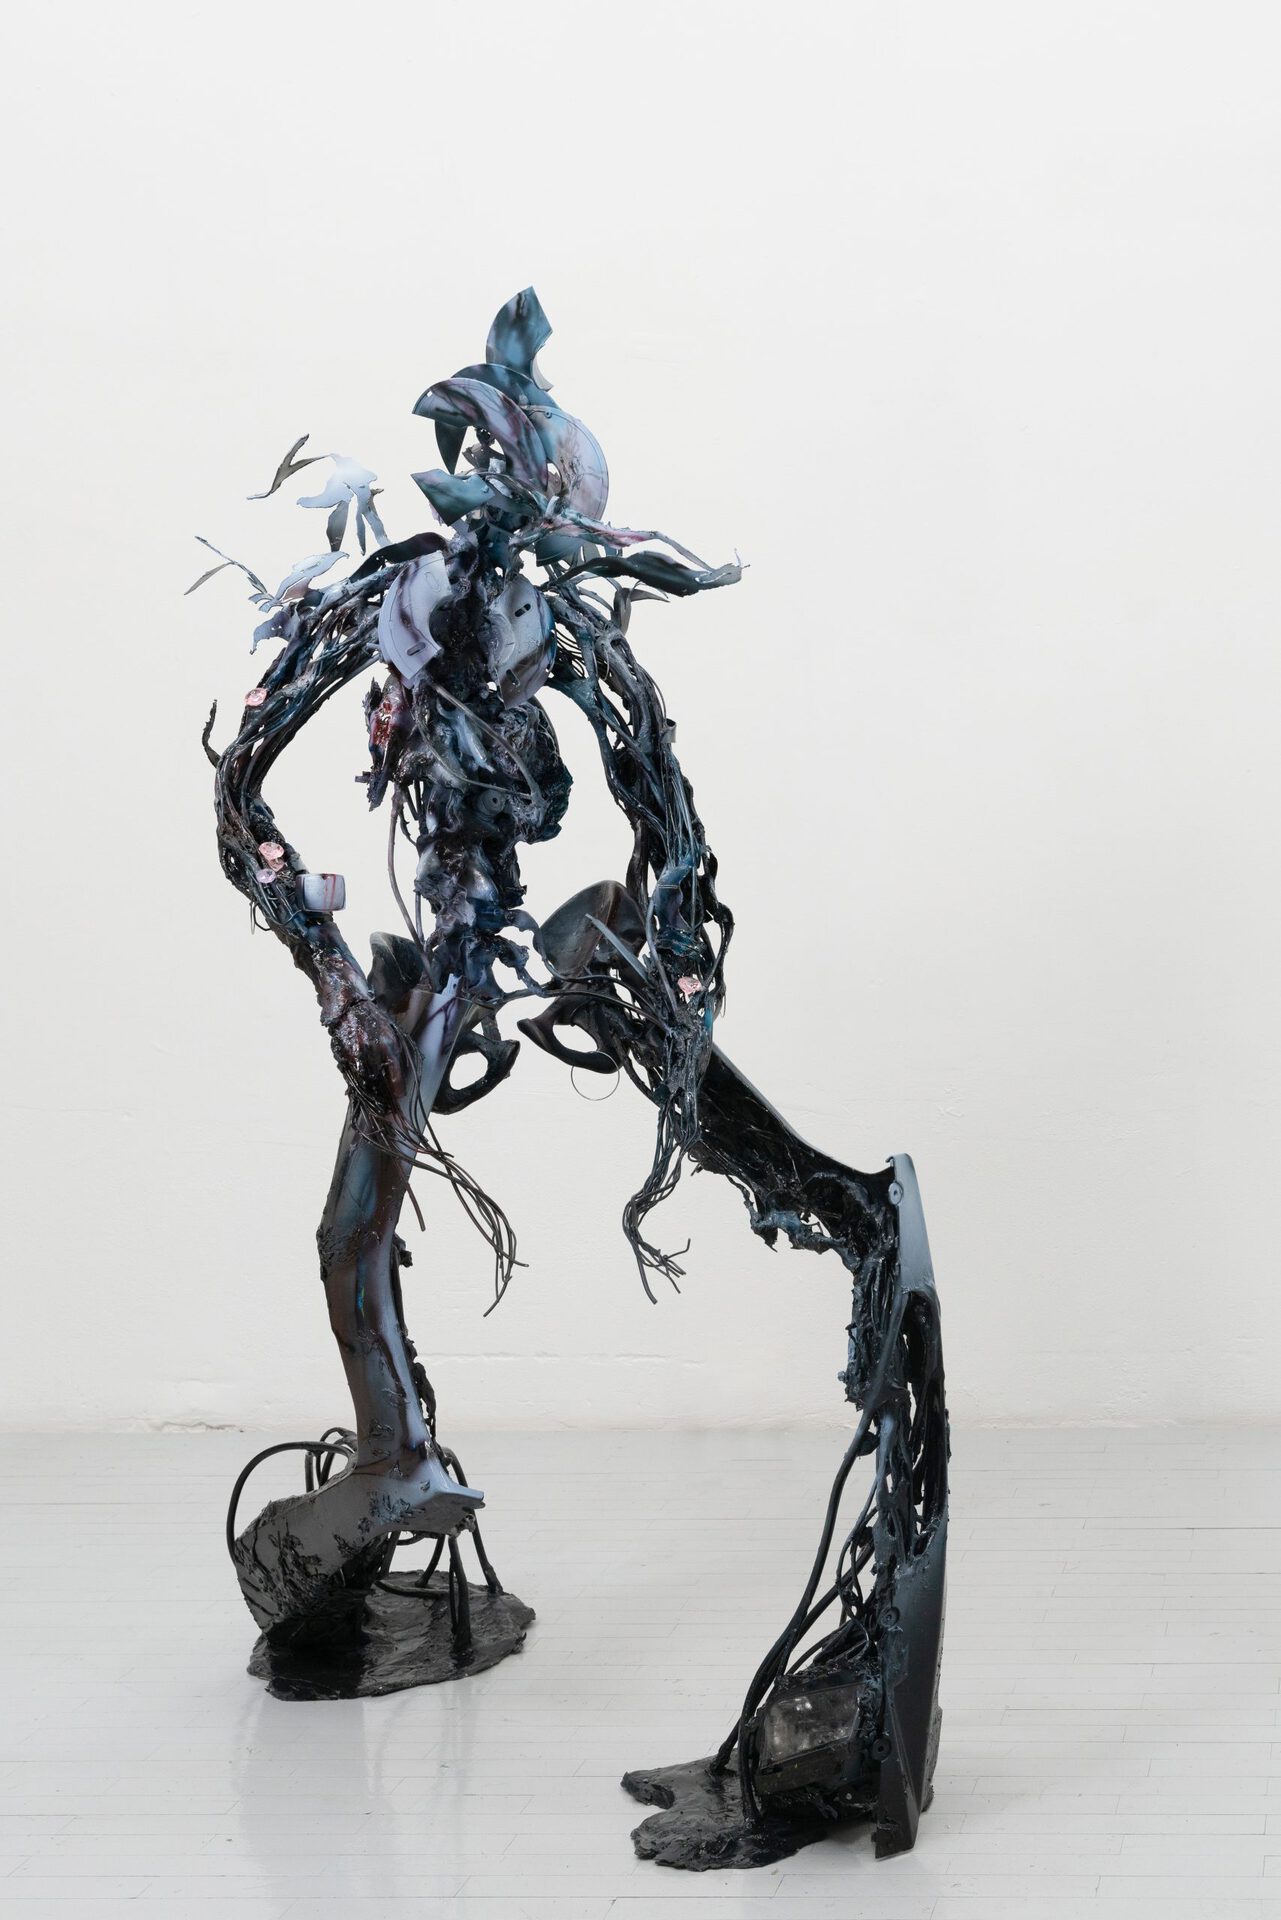 Yein Lee, Savior syndrome or good girl complex, starring perpetual past, 2022, electrical wire, epoxy putty, steel, plaster of paris, motorbi- ke parts, paint, plastic waste